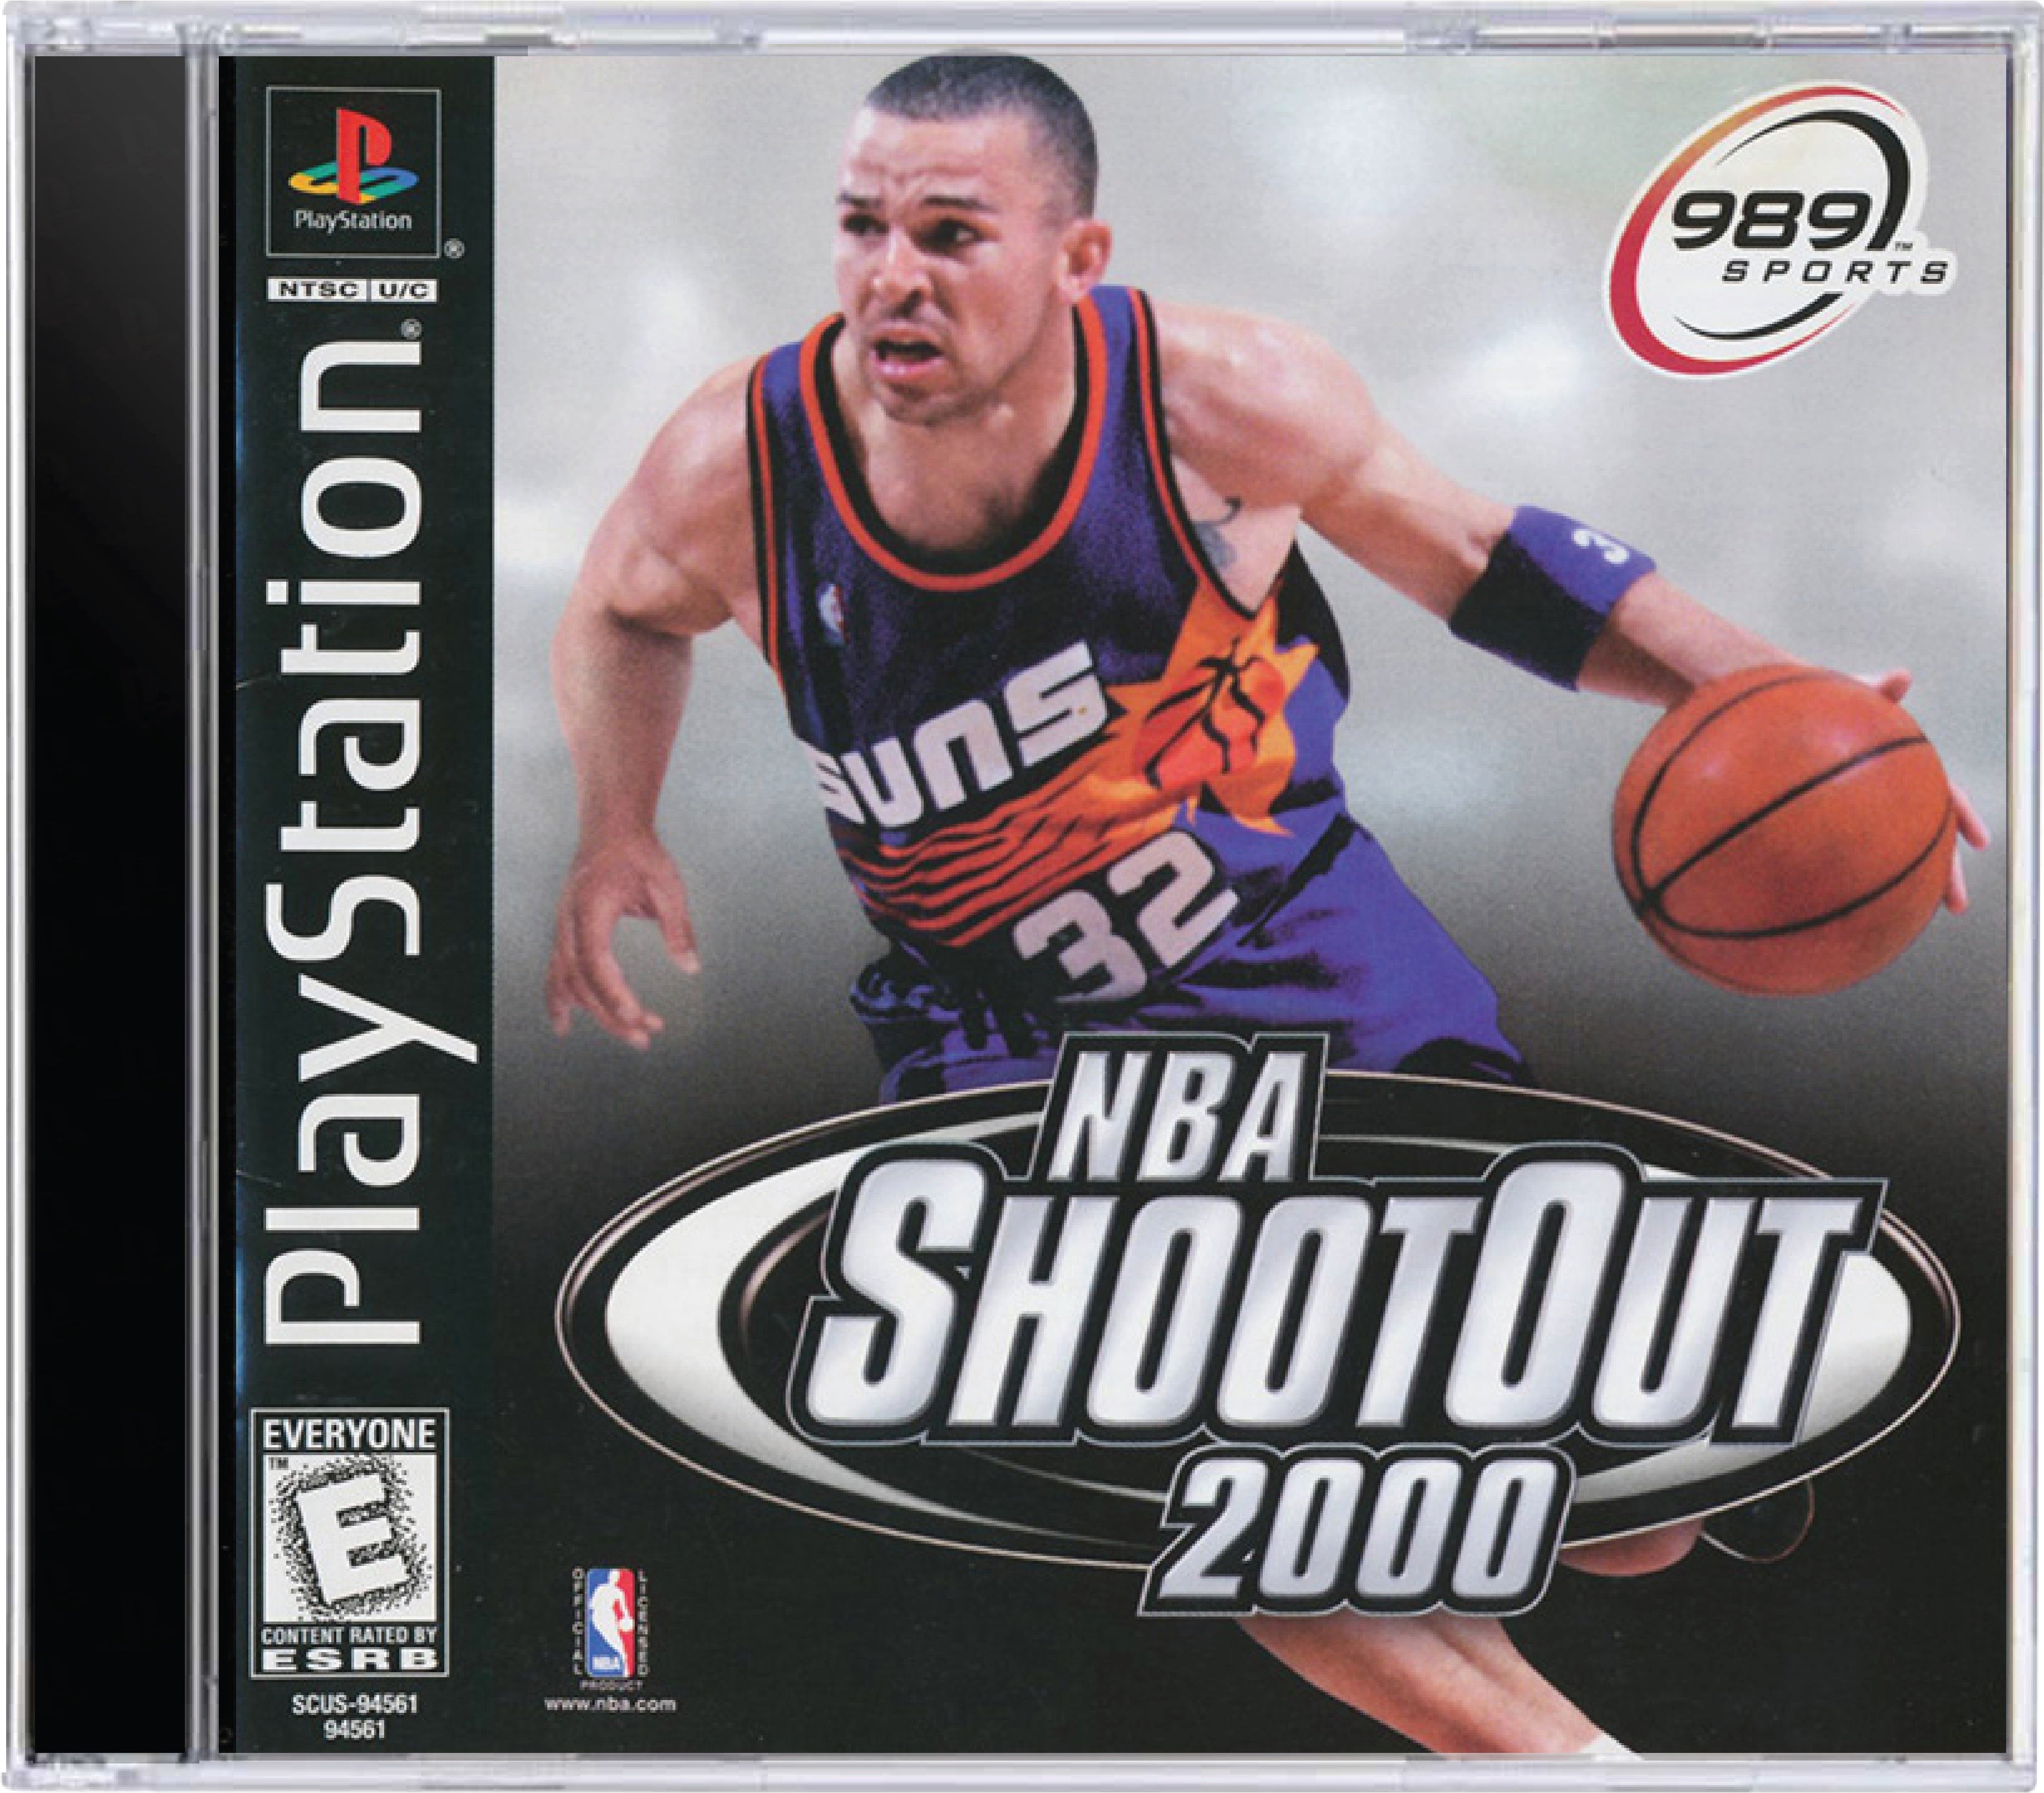 NBA ShootOut 2000 Cover Art and Product Photo